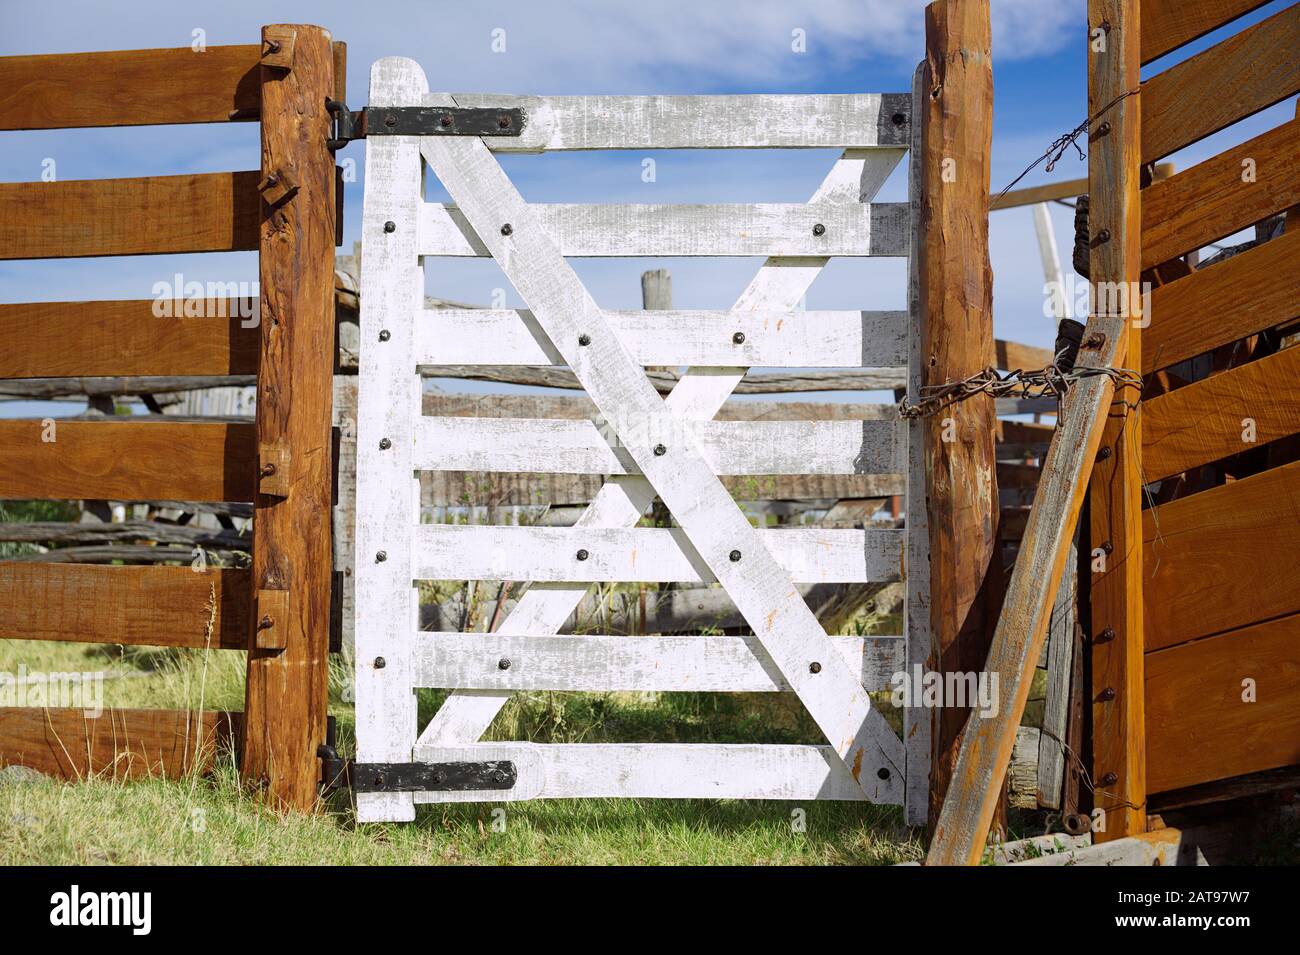 Estancia La Quinta: the wooden gate to the Patagonian steppe, locked with chain. El Chaltén, Patagonia, Argentina Stock Photo